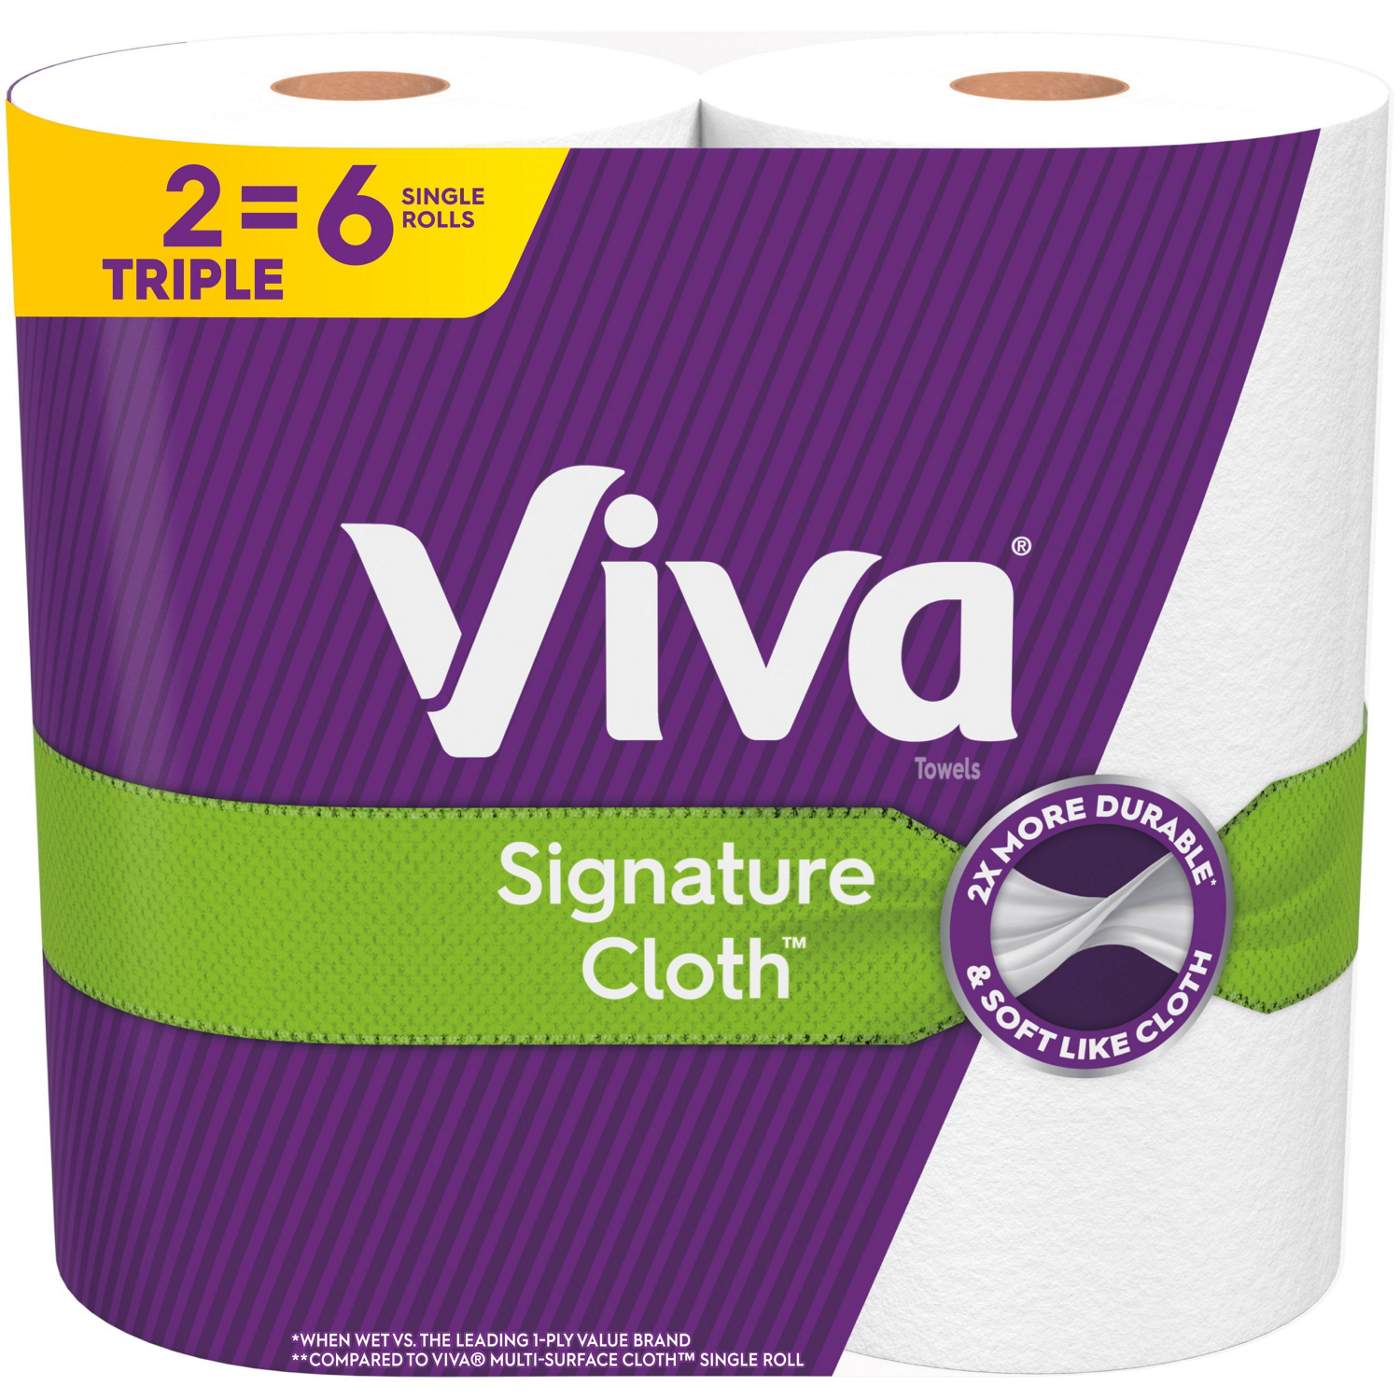 Viva Signature Cloth Choose-A-Size Triple Roll Paper Towels; image 1 of 8